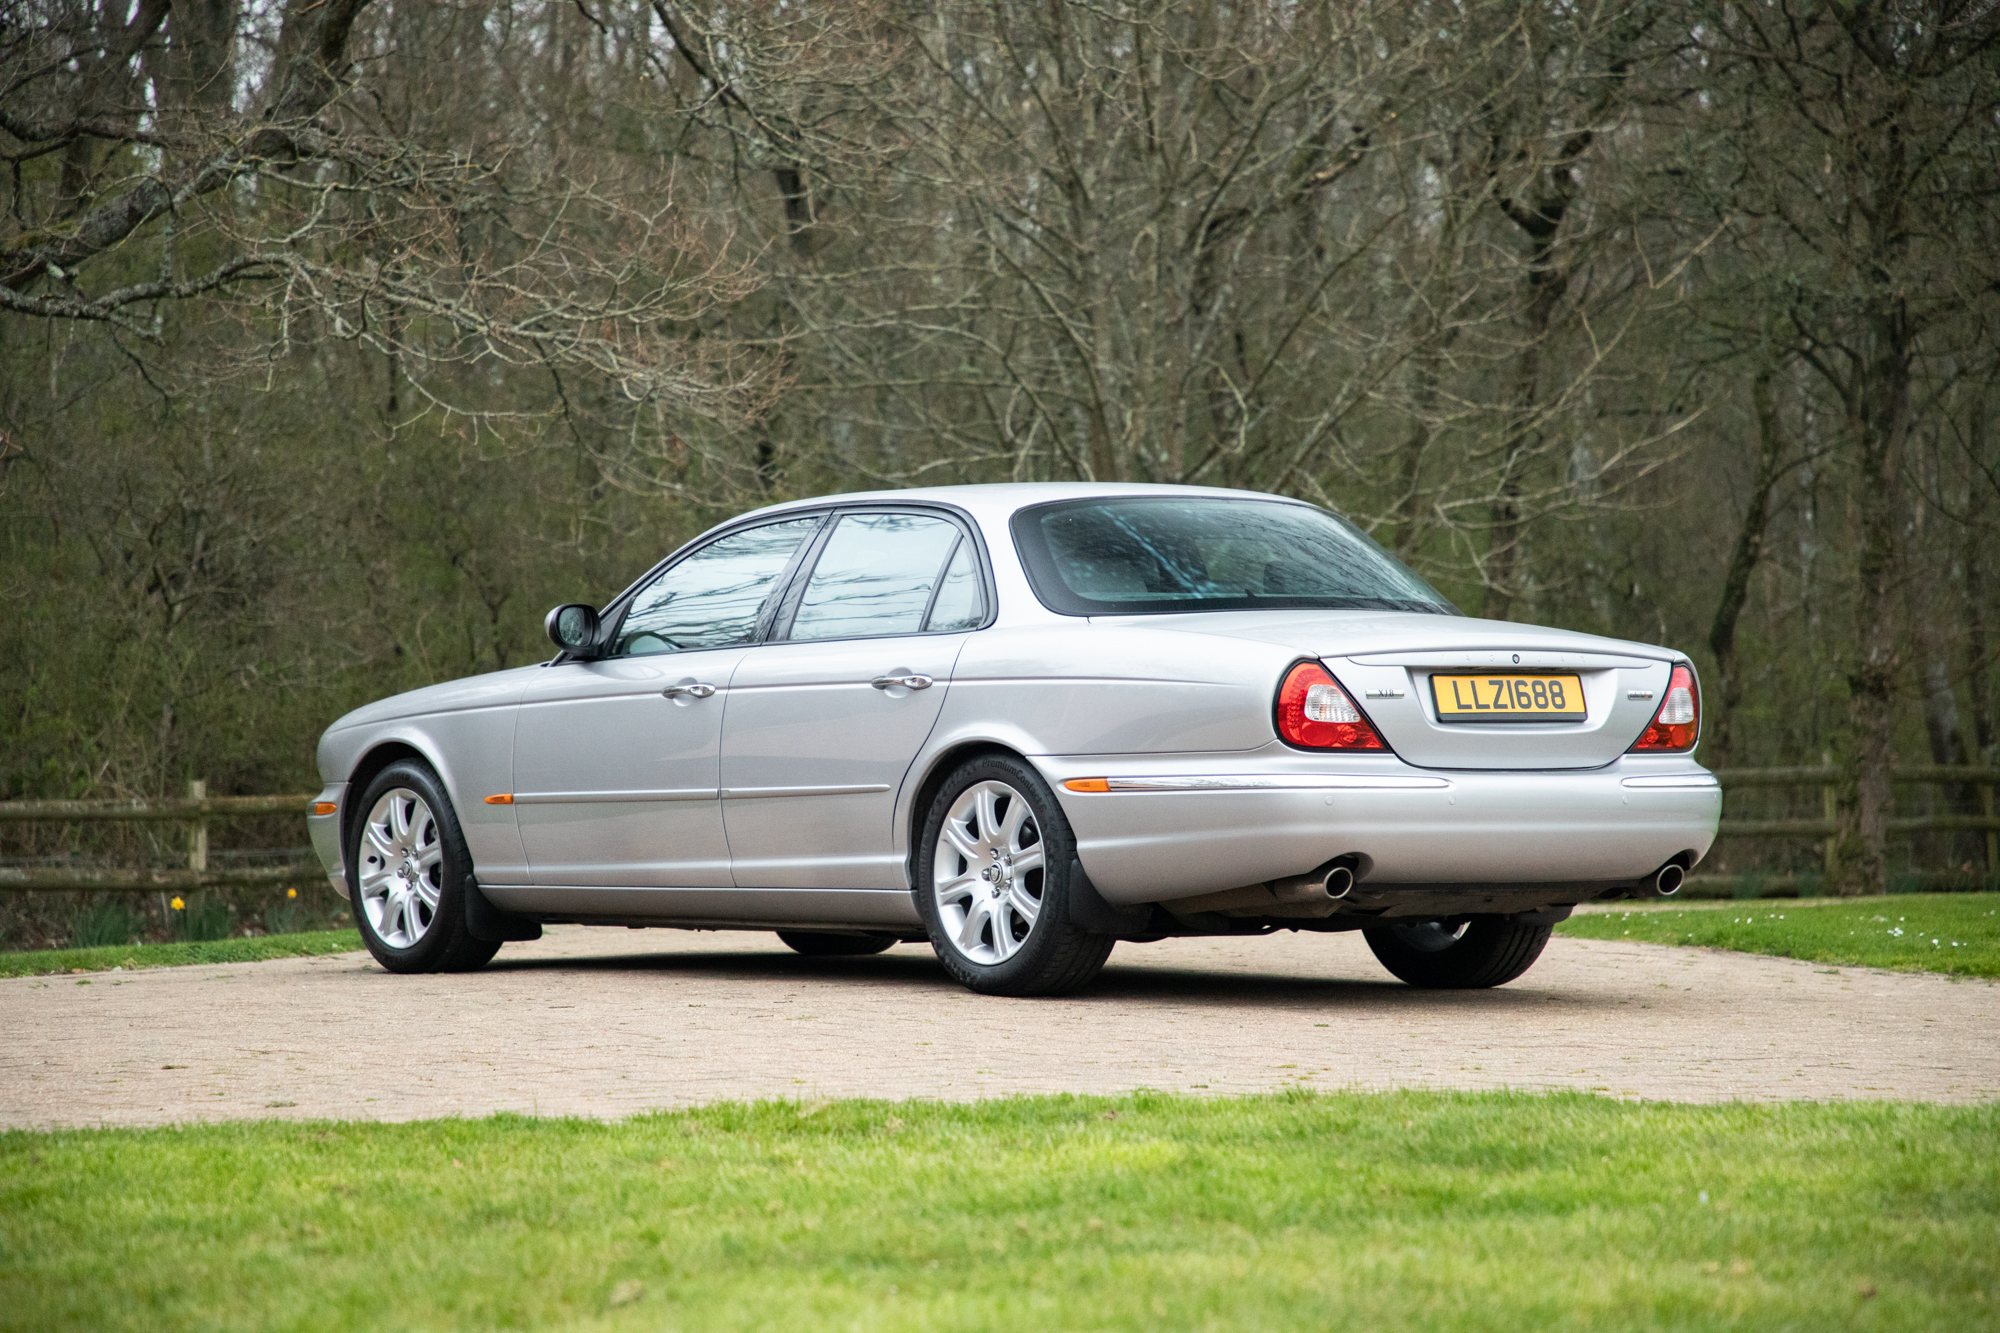 2003 JAGUAR XJ8 4.2 S for sale by auction in Ashford, Kent, United